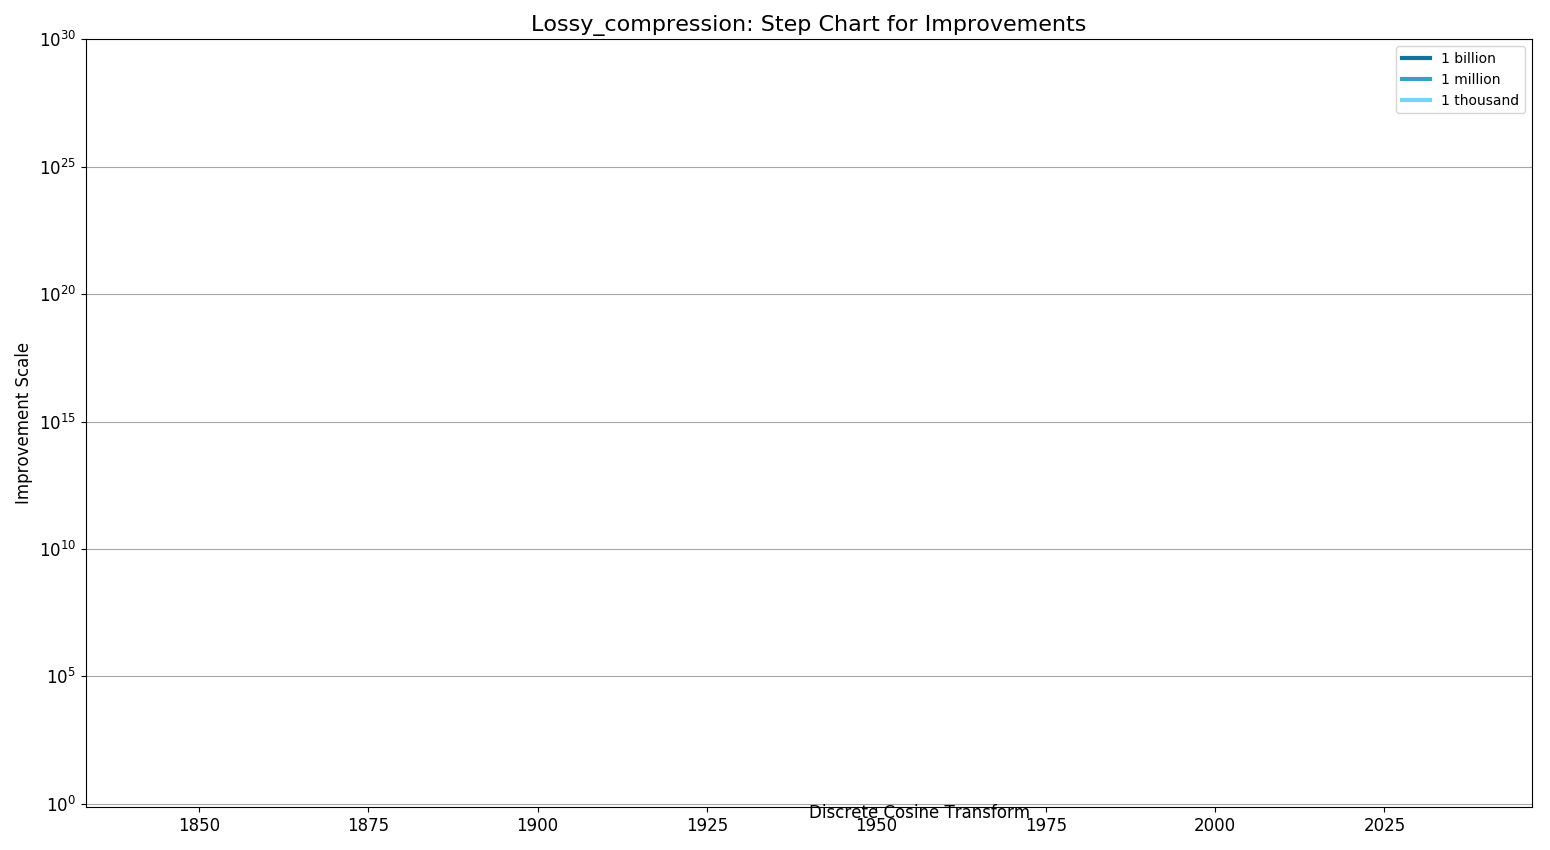 Lossy compressionStepChart.png